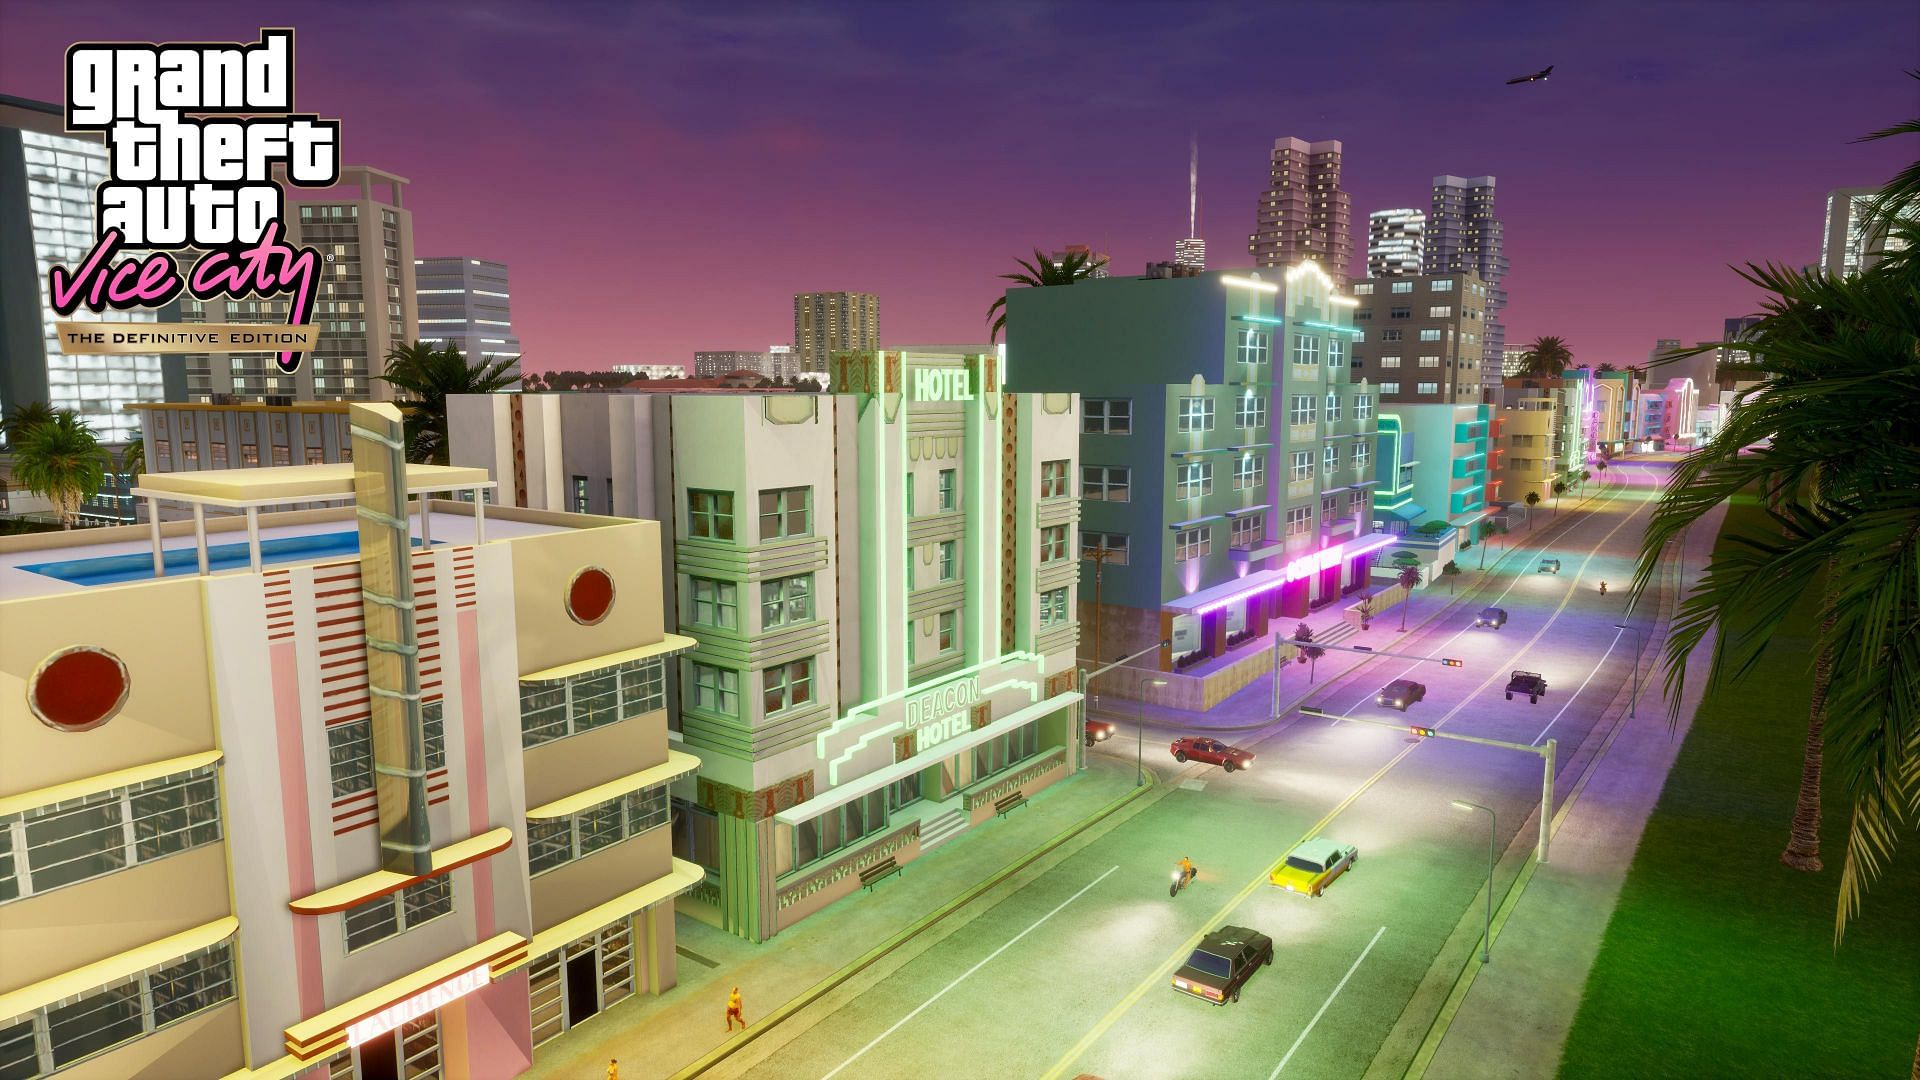 The older version of the GTA Vice Gity Definitive Edition supported quite a few cheats (Image via Rockstar/GTA Vice City)